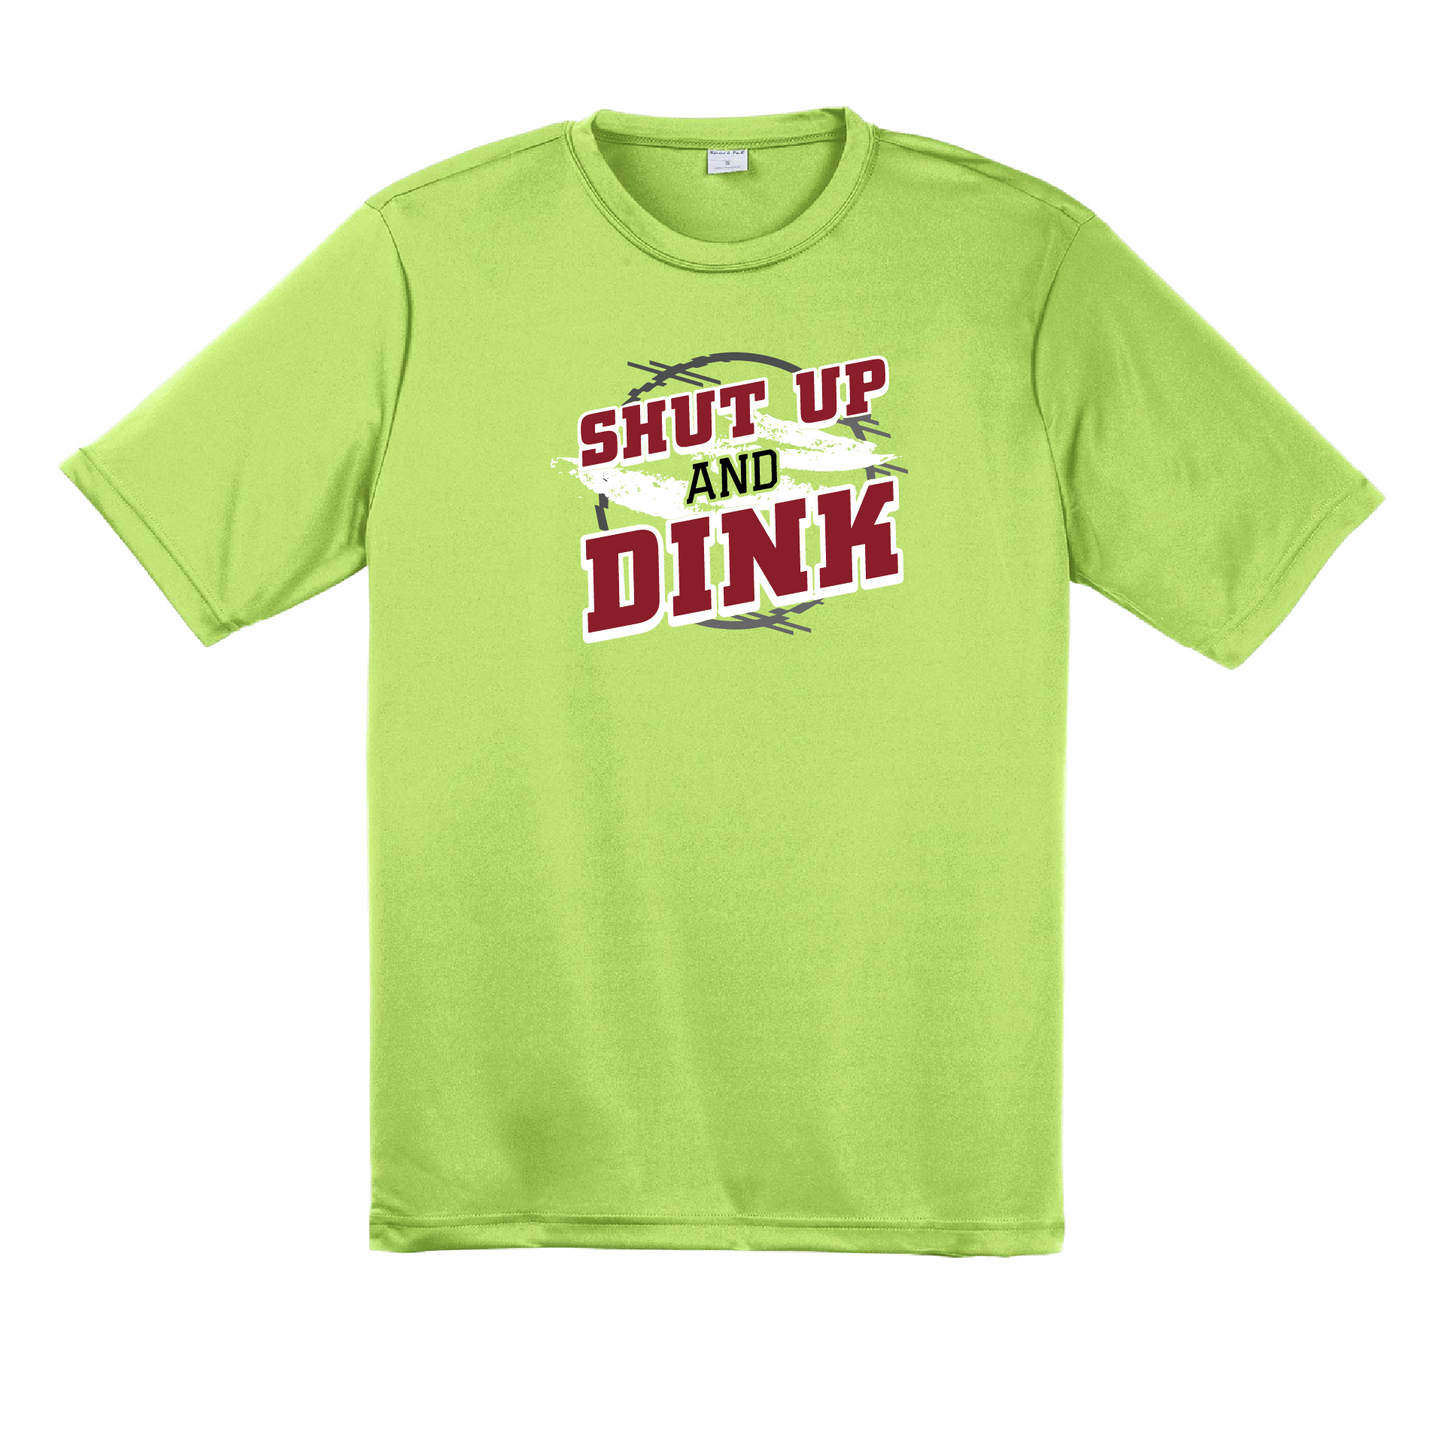 Pickleball Design: Shut up and Dink  Men's Styles: Short-Sleeve  Shirts are lightweight, roomy and highly breathable. These moisture-wicking shirts are designed for athletic performance. They feature PosiCharge technology to lock in color and prevent logos from fading. Removable tag and set-in sleeves for comfort.